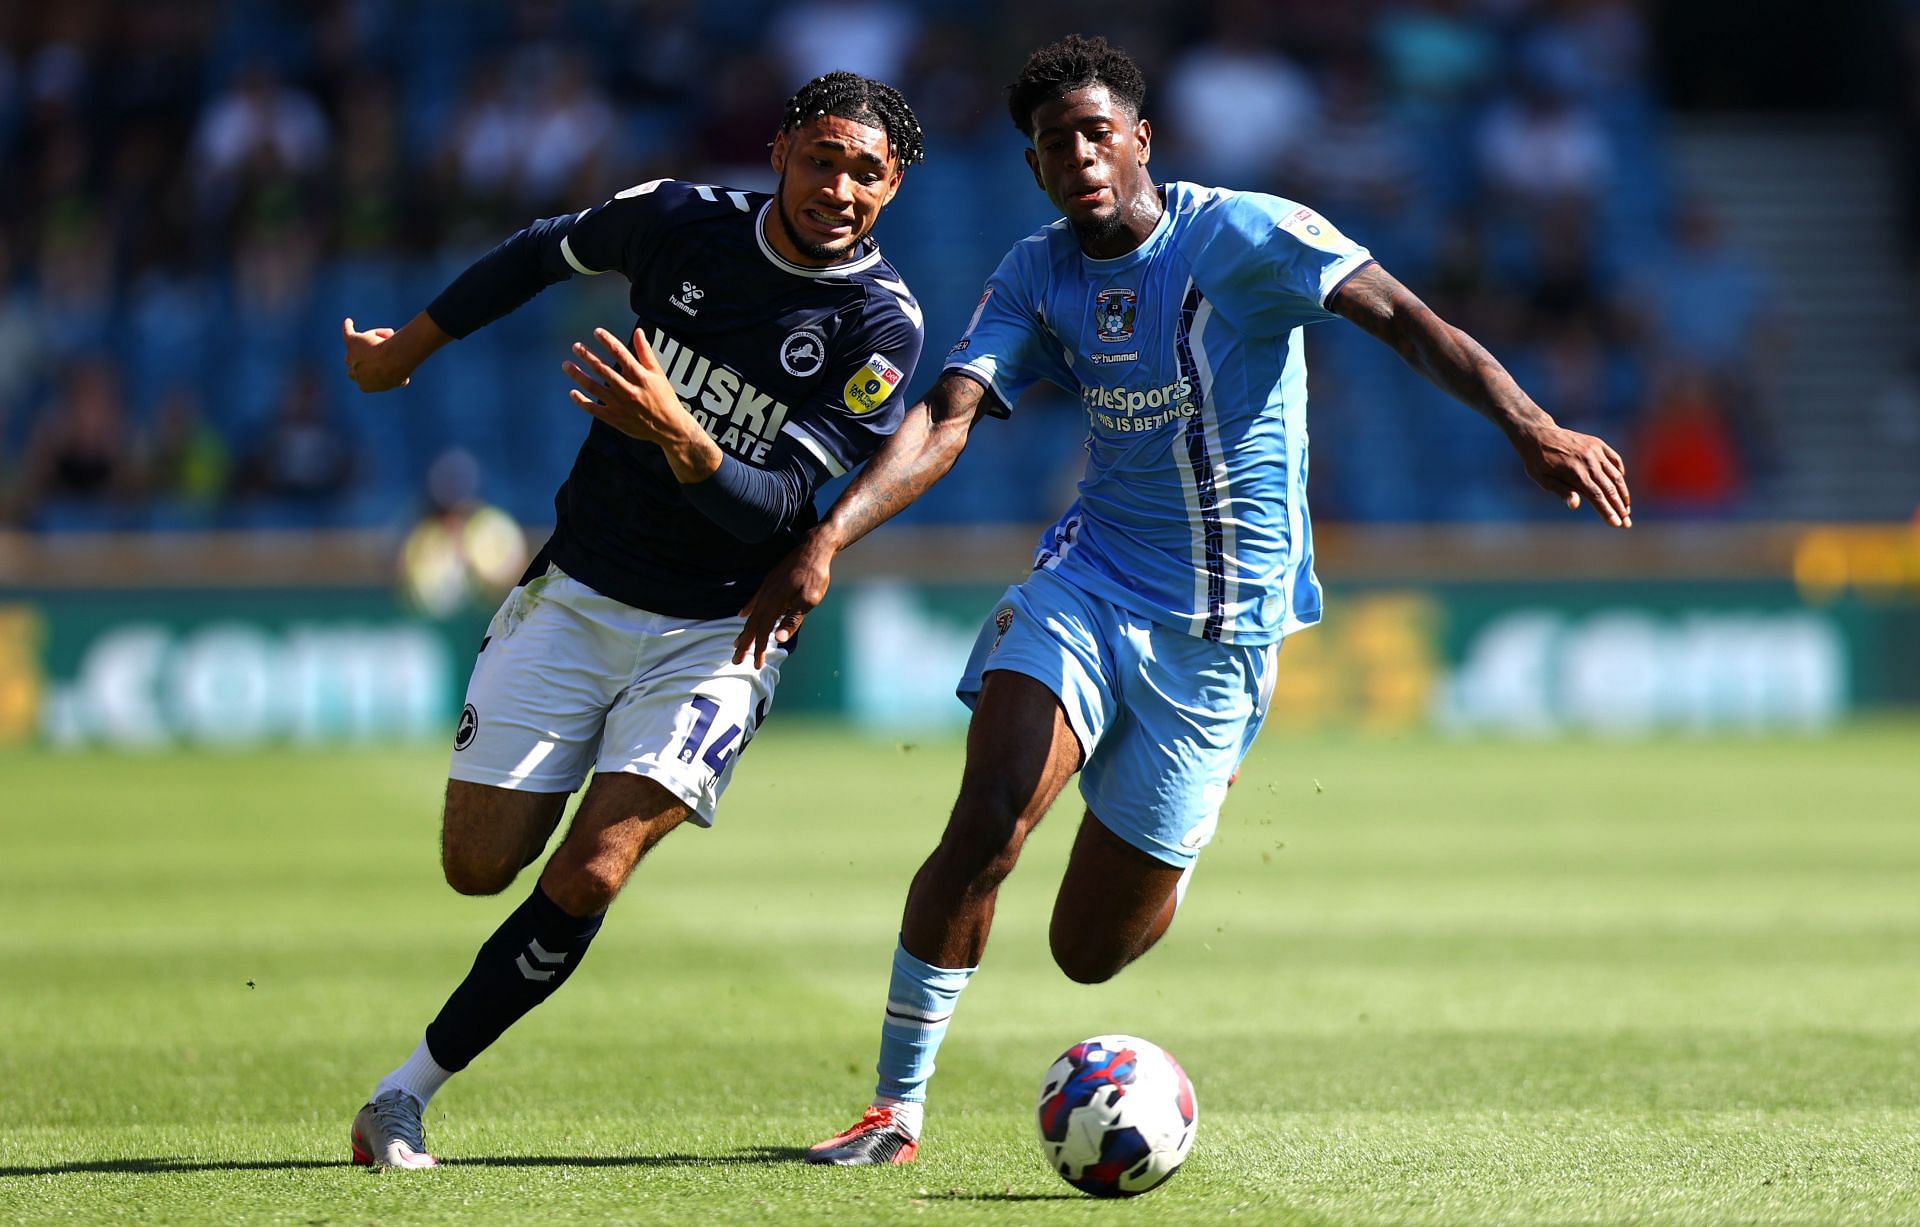 Coventry City vs Millwall Prediction and Betting Tips